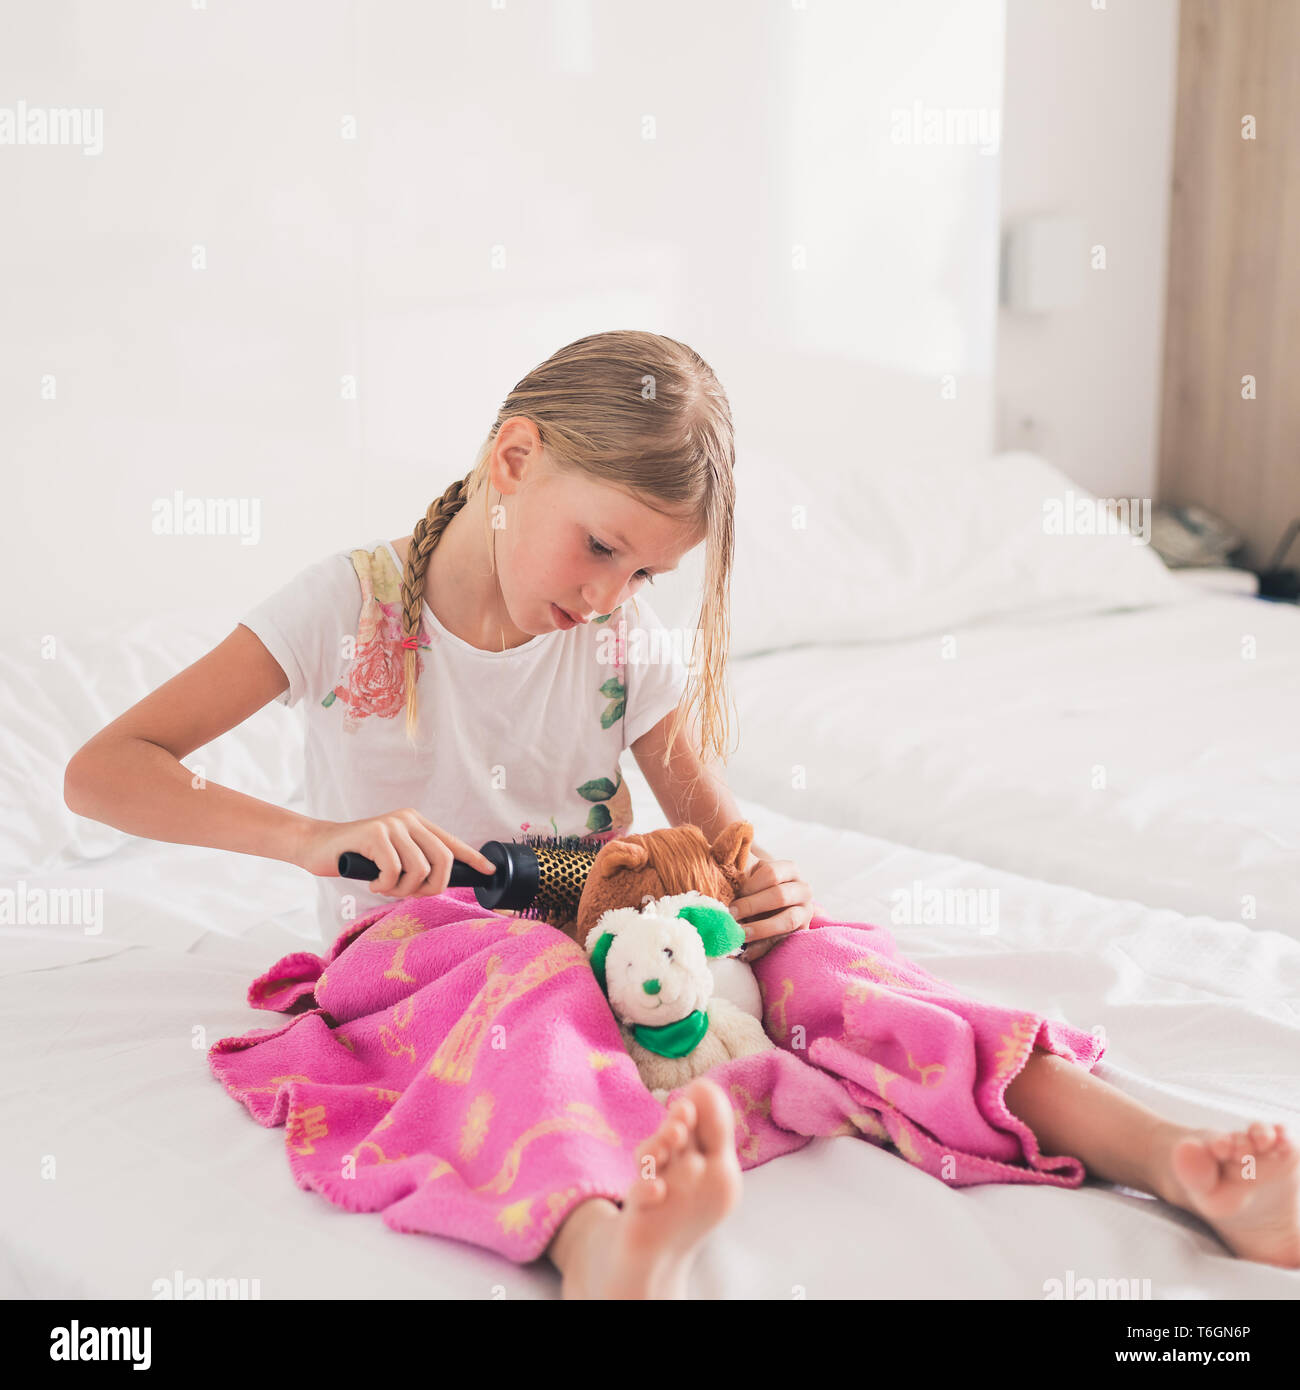 Young girl combing hair of cuddly toy Stock Photo